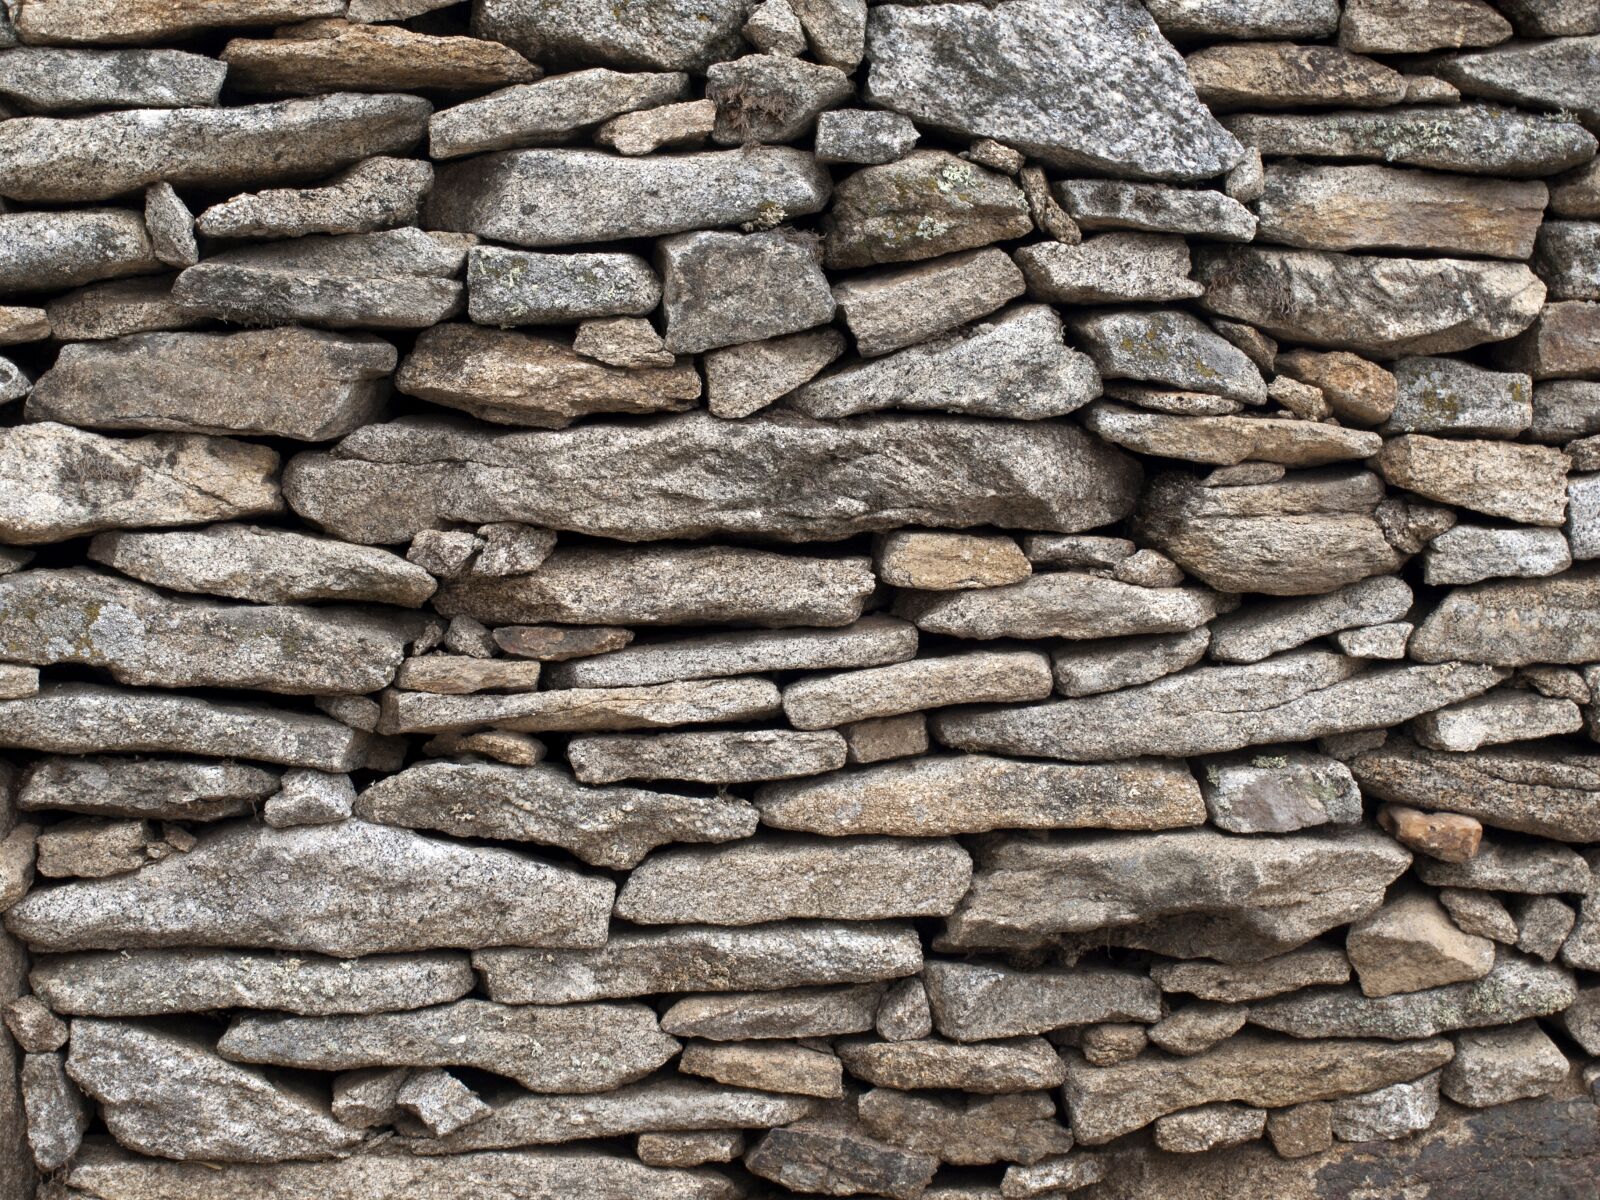 OLYMPUS 14-42mm Lens sample photo. Wall stones, stones, background photography